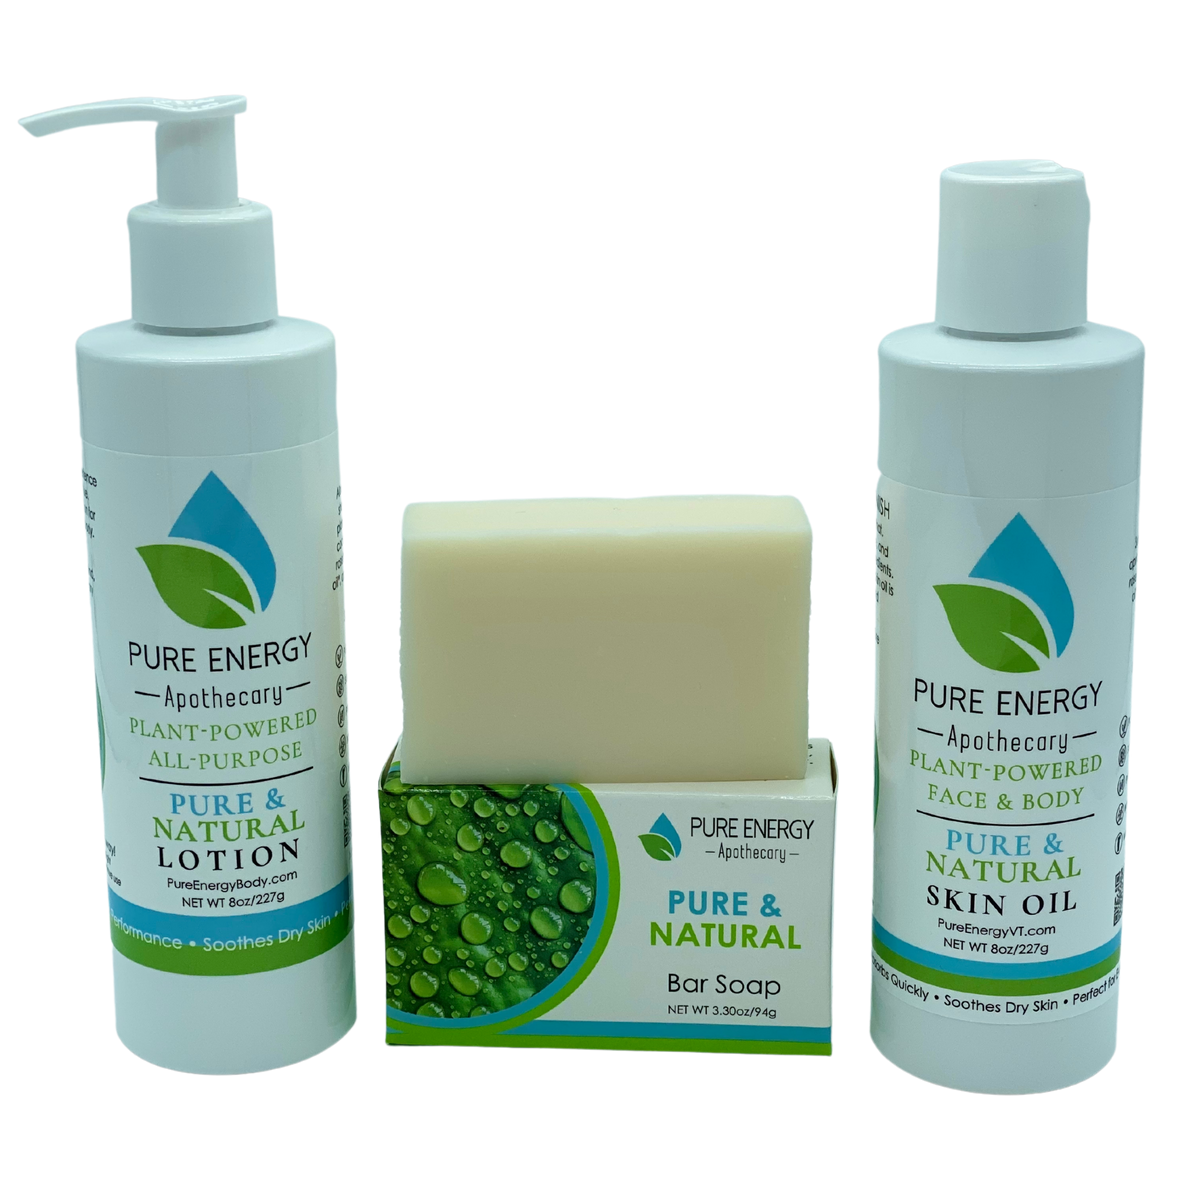 Daily Delight Gift Set (Pure & Natural) by Pure Energy Apothecary